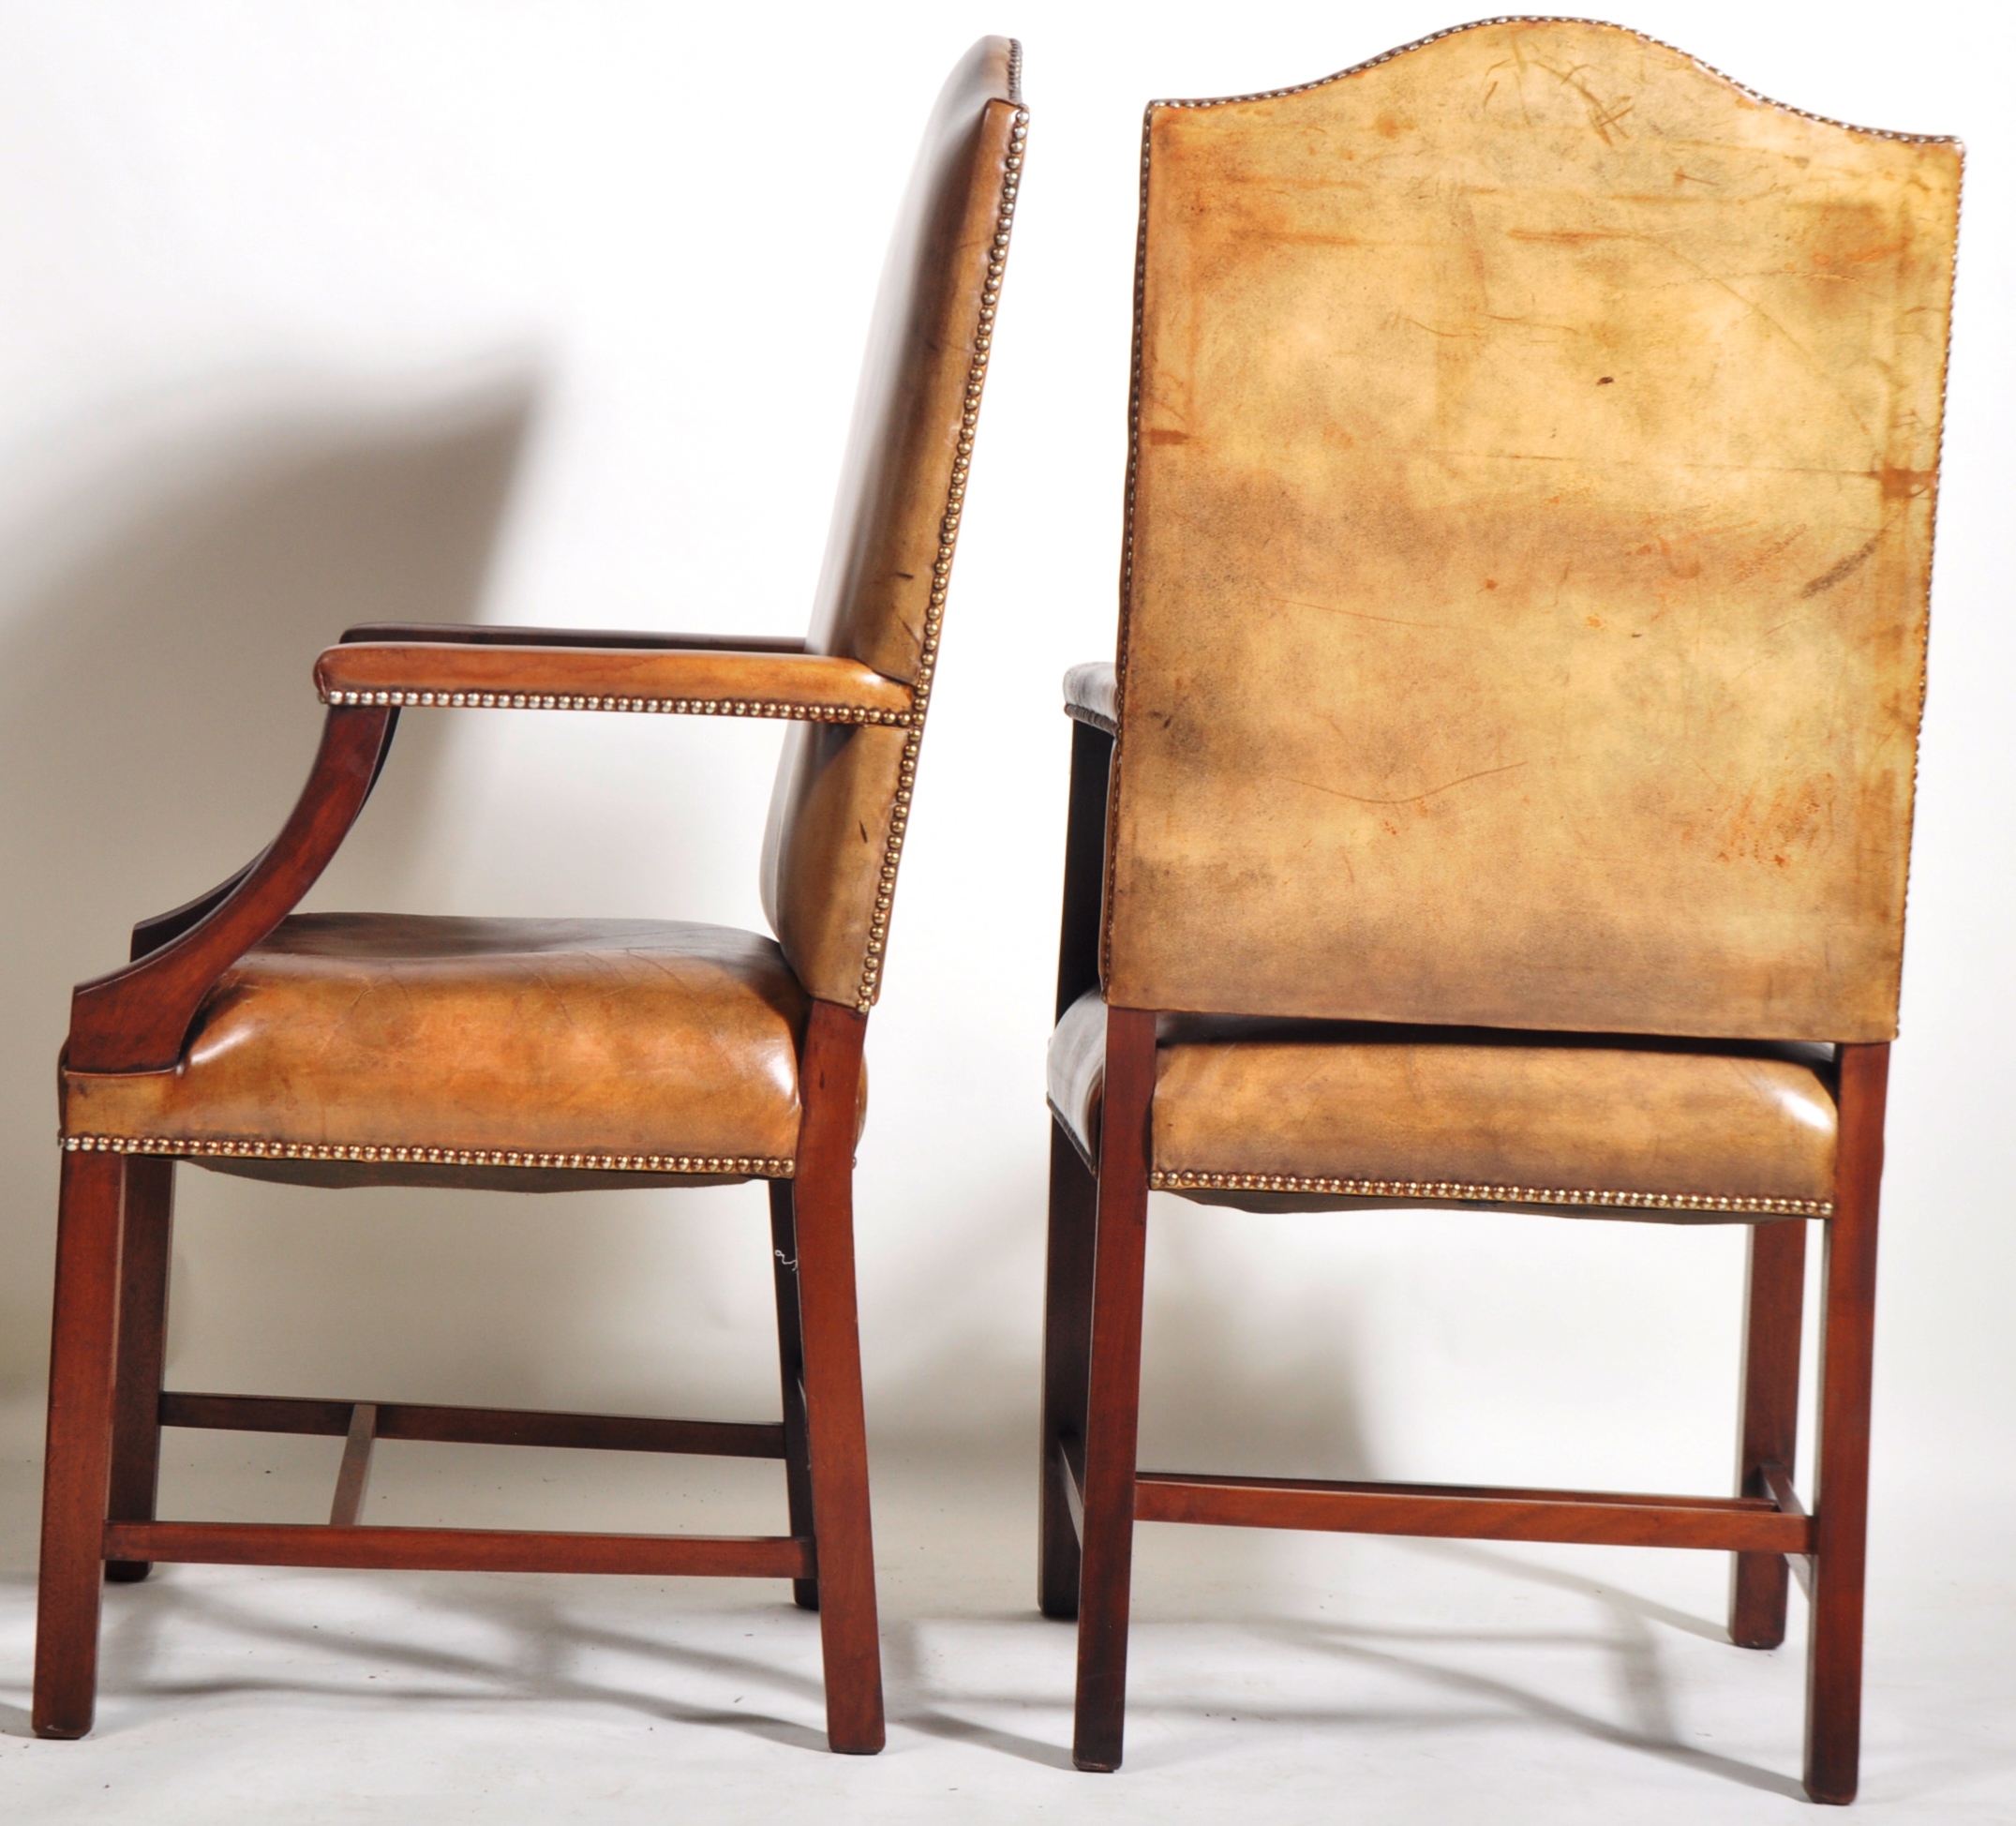 PAIR OF GEORGE II MANNER FAUX LEATHER GAINSBOROUGH ARMCHAIRS - Image 7 of 7